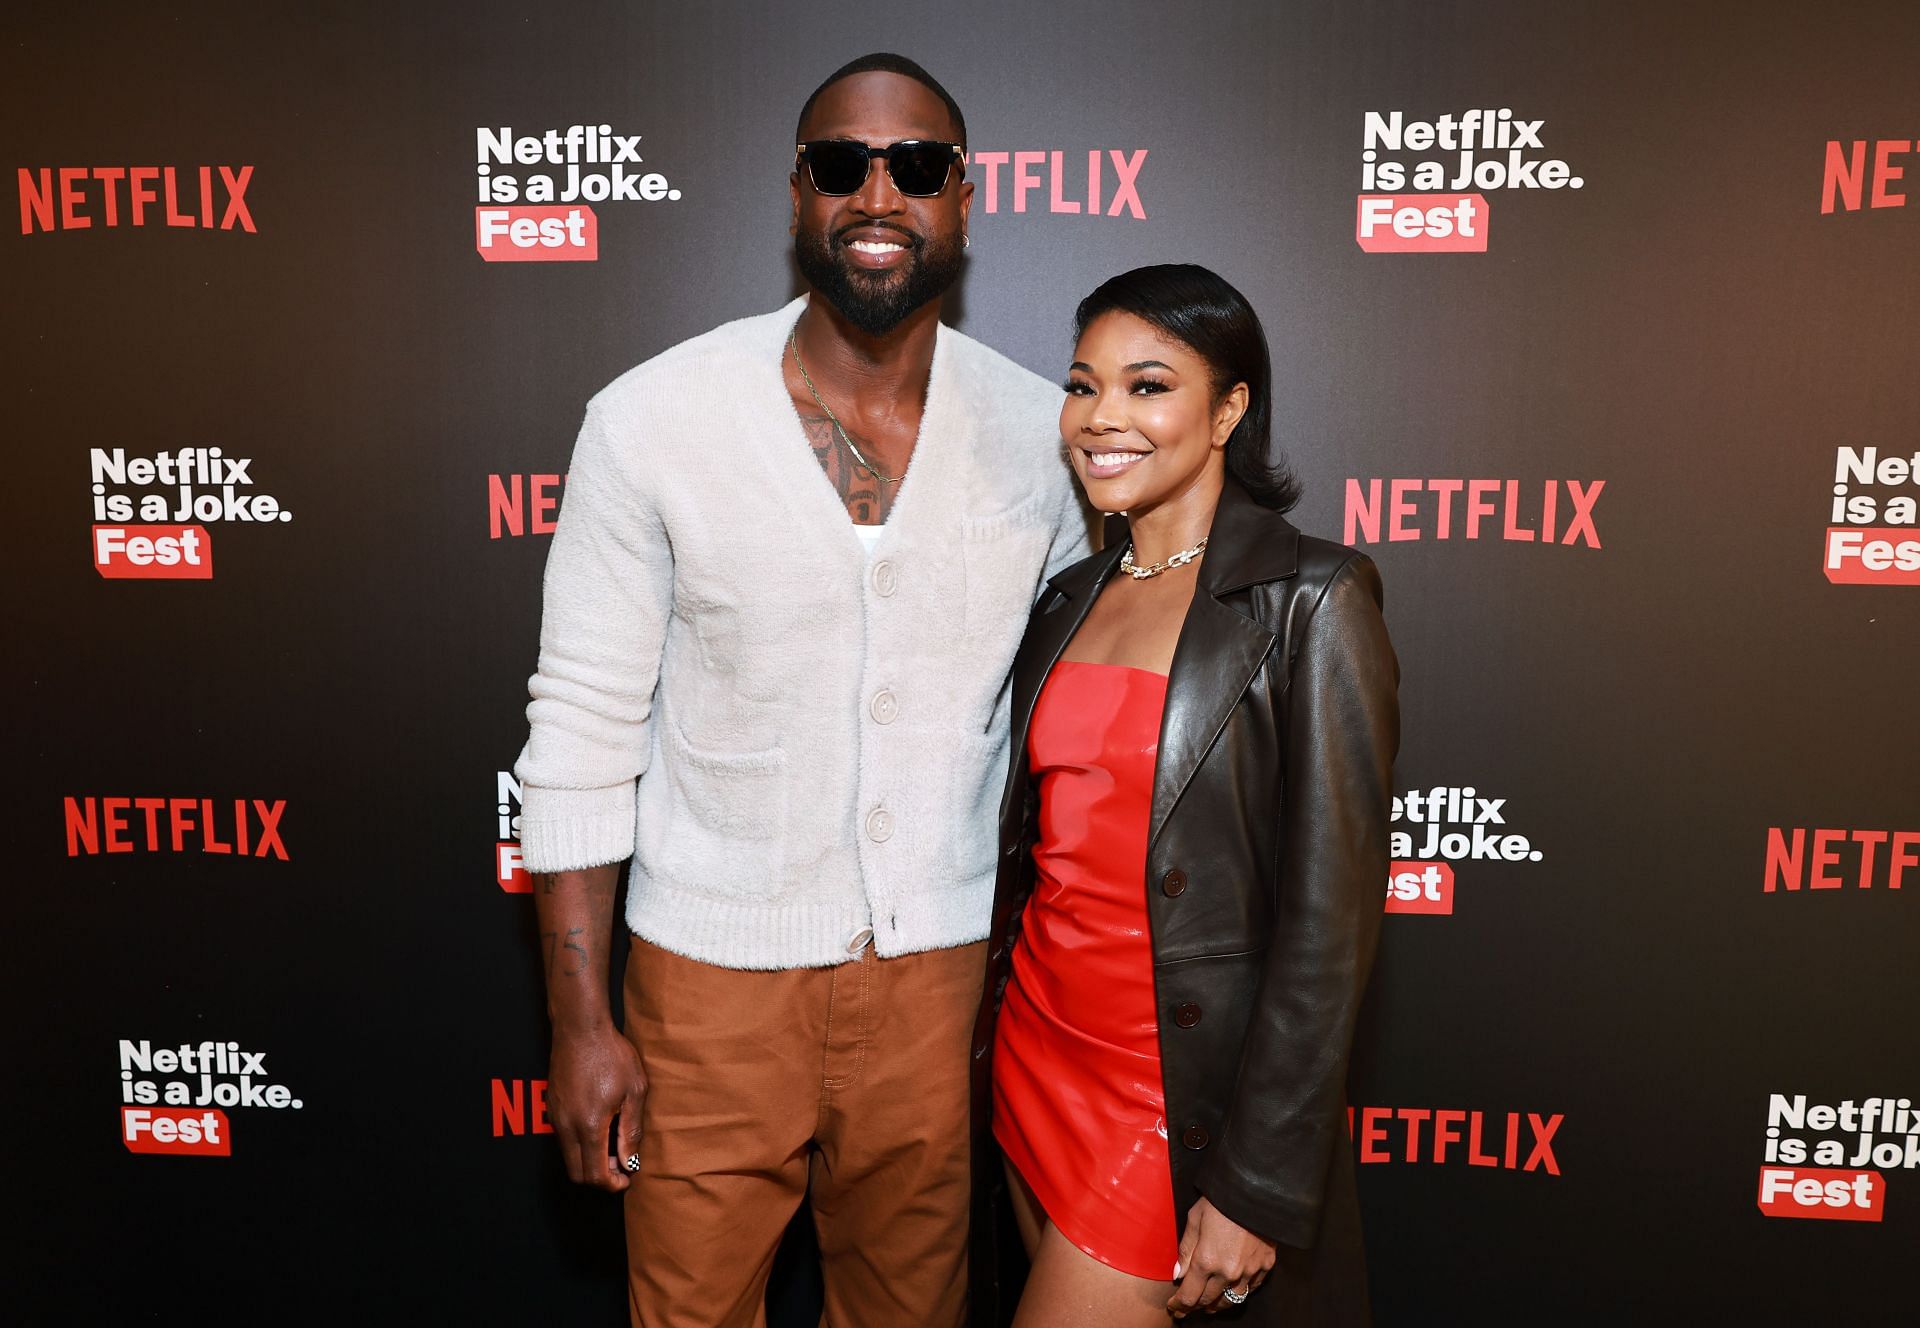 Netflix Is A Joke Fest - When We Gather: A Night Of Stand-Up Comedy Curated By Dwyane Wade